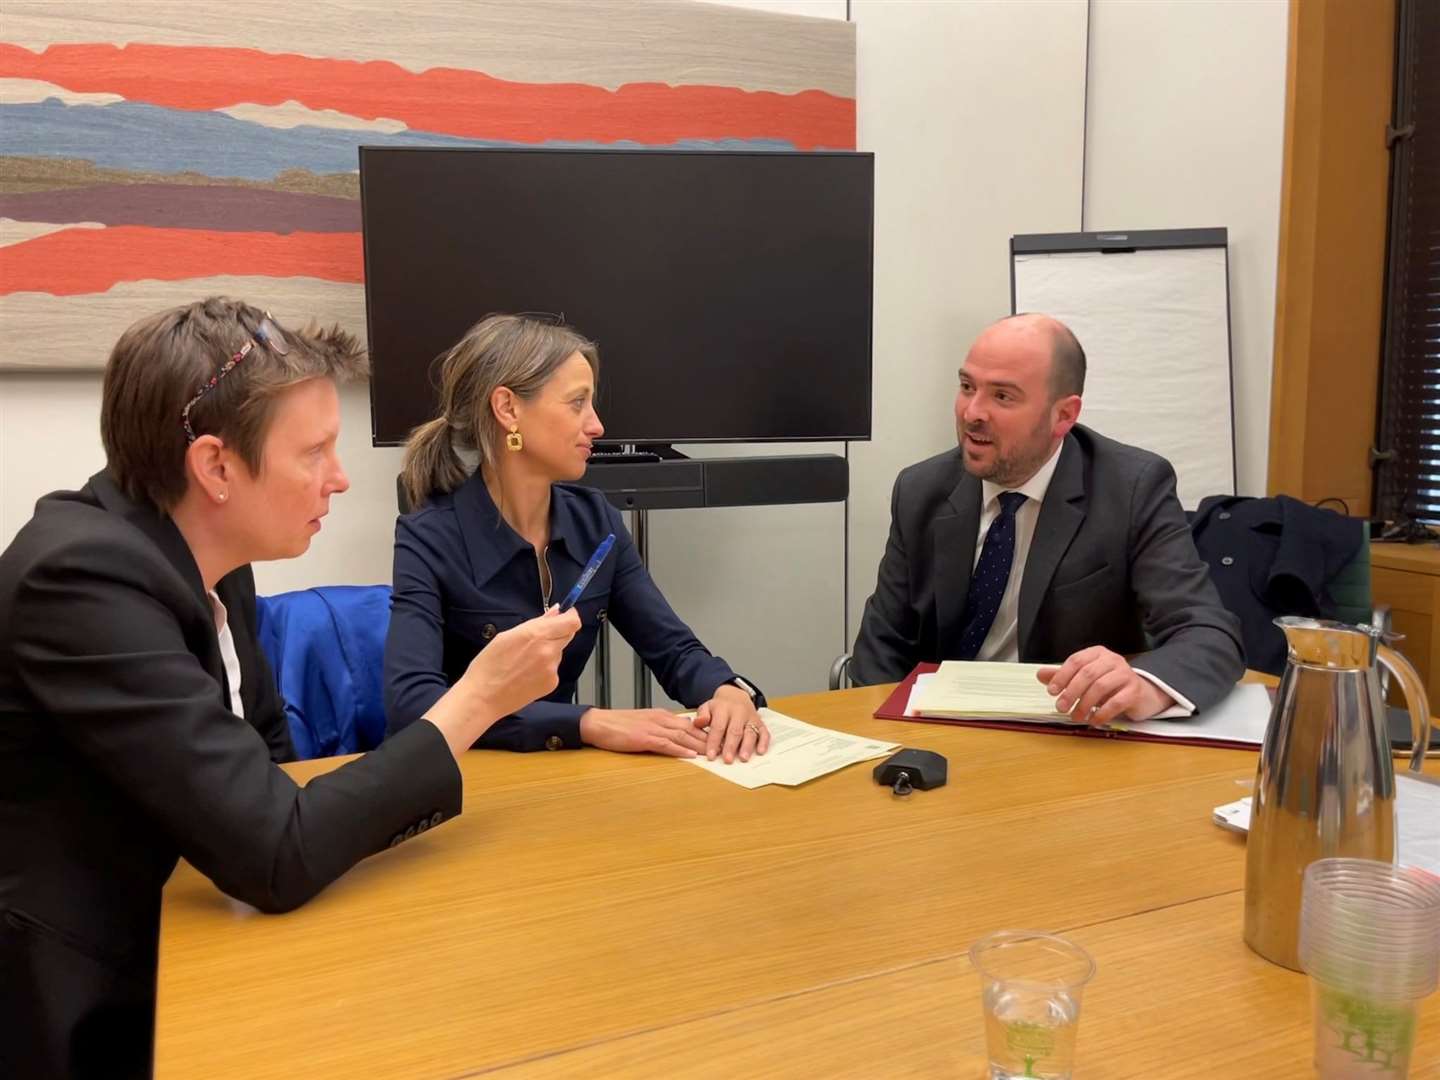 MPs Tracey Crouch and Helen Whately met with roads minister Richard Holden. Picture: Helen Whately